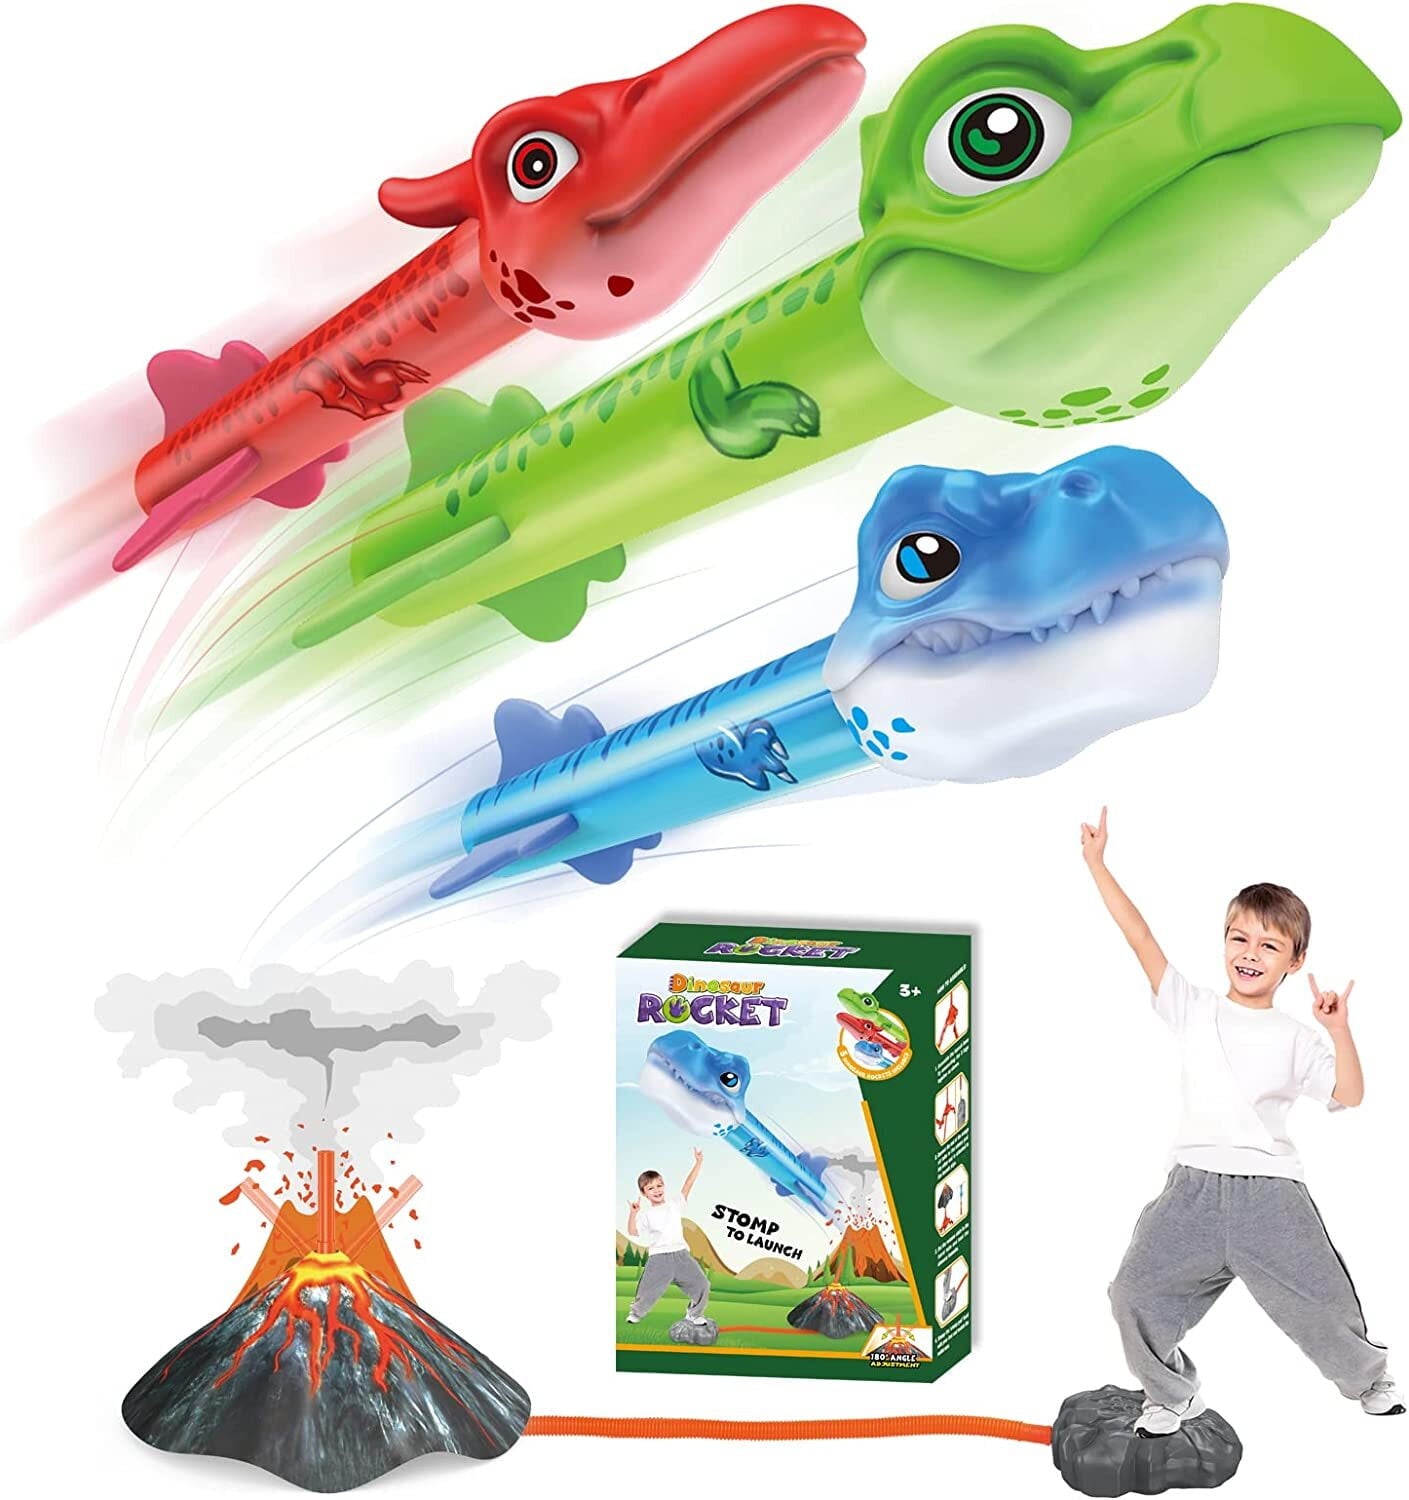 Dinosaur Rocket Launcher Dino Blaster For Kids Birthday Gifts Family Fun Toys, For Boys & Girls Age 3 4 5 6 7 8 Years Old